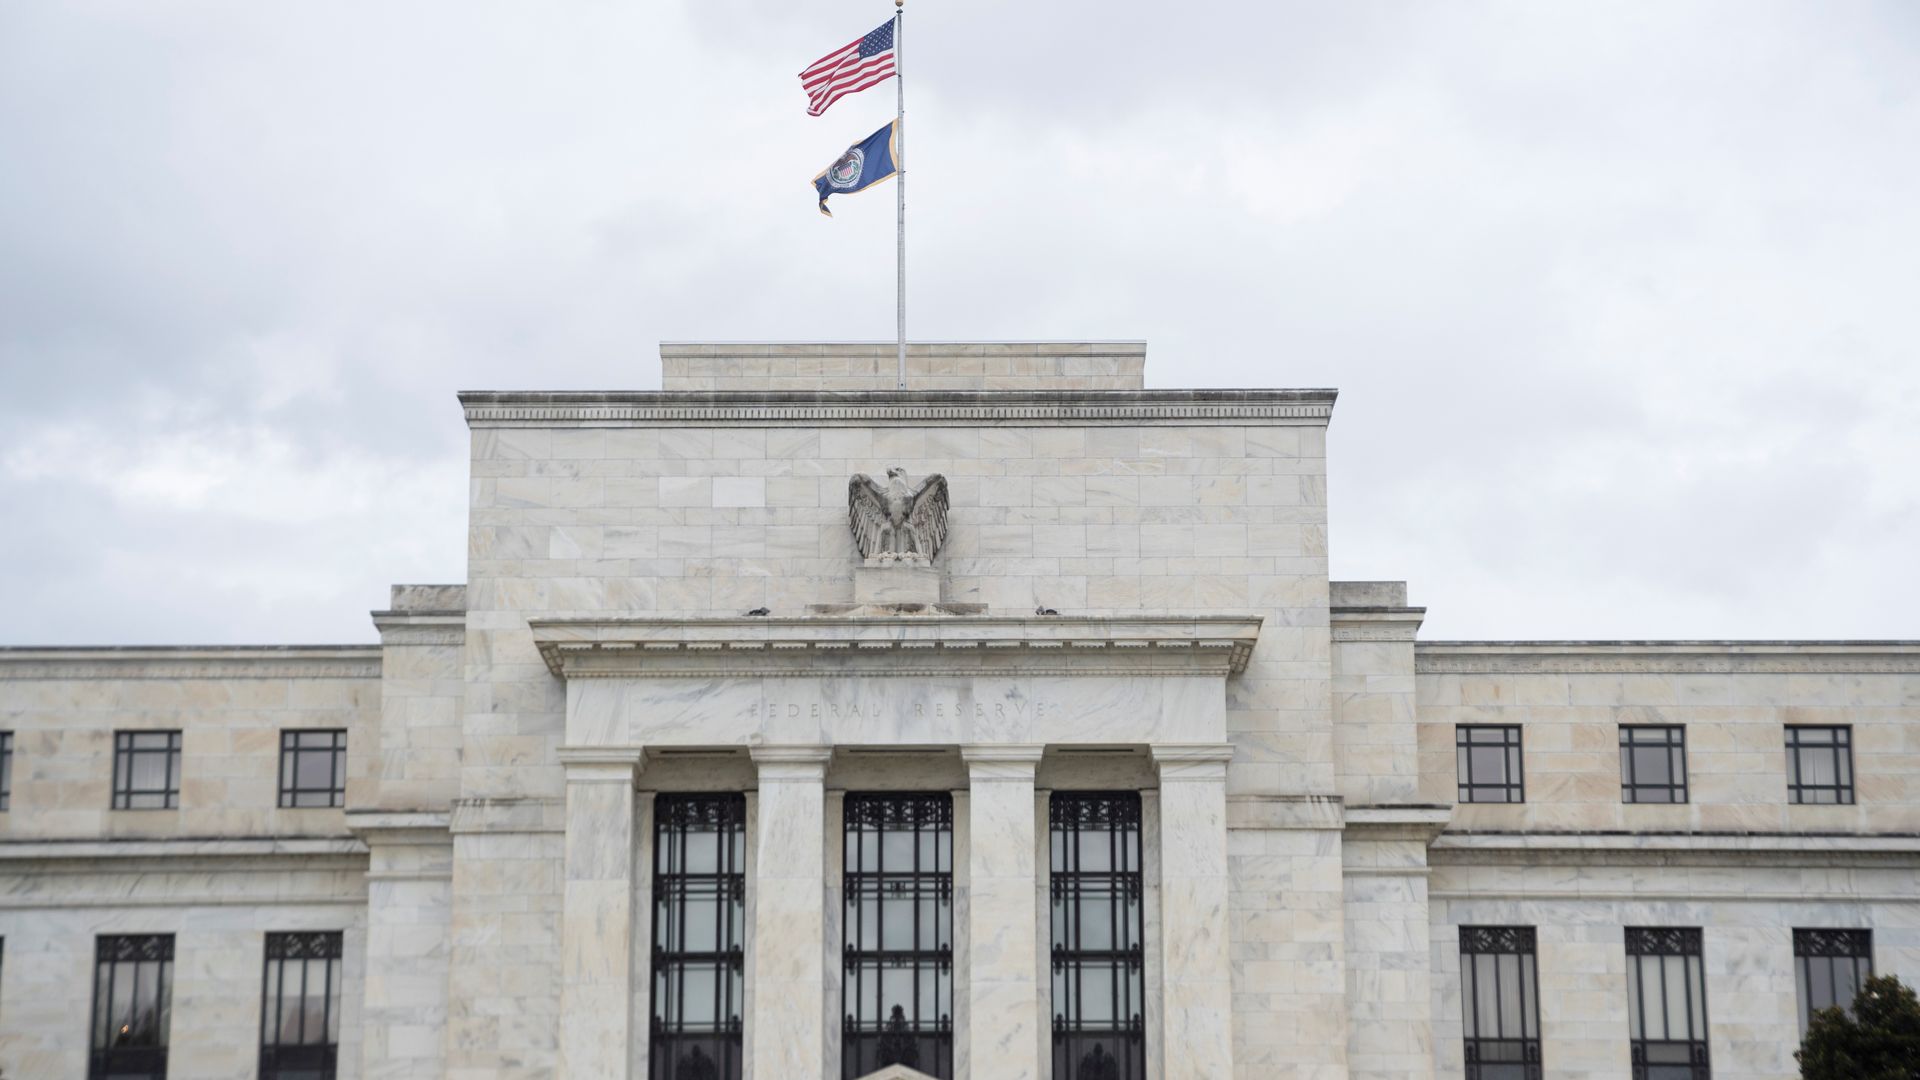 Photo of the U.S. Federal Reserve building with two flags at the top